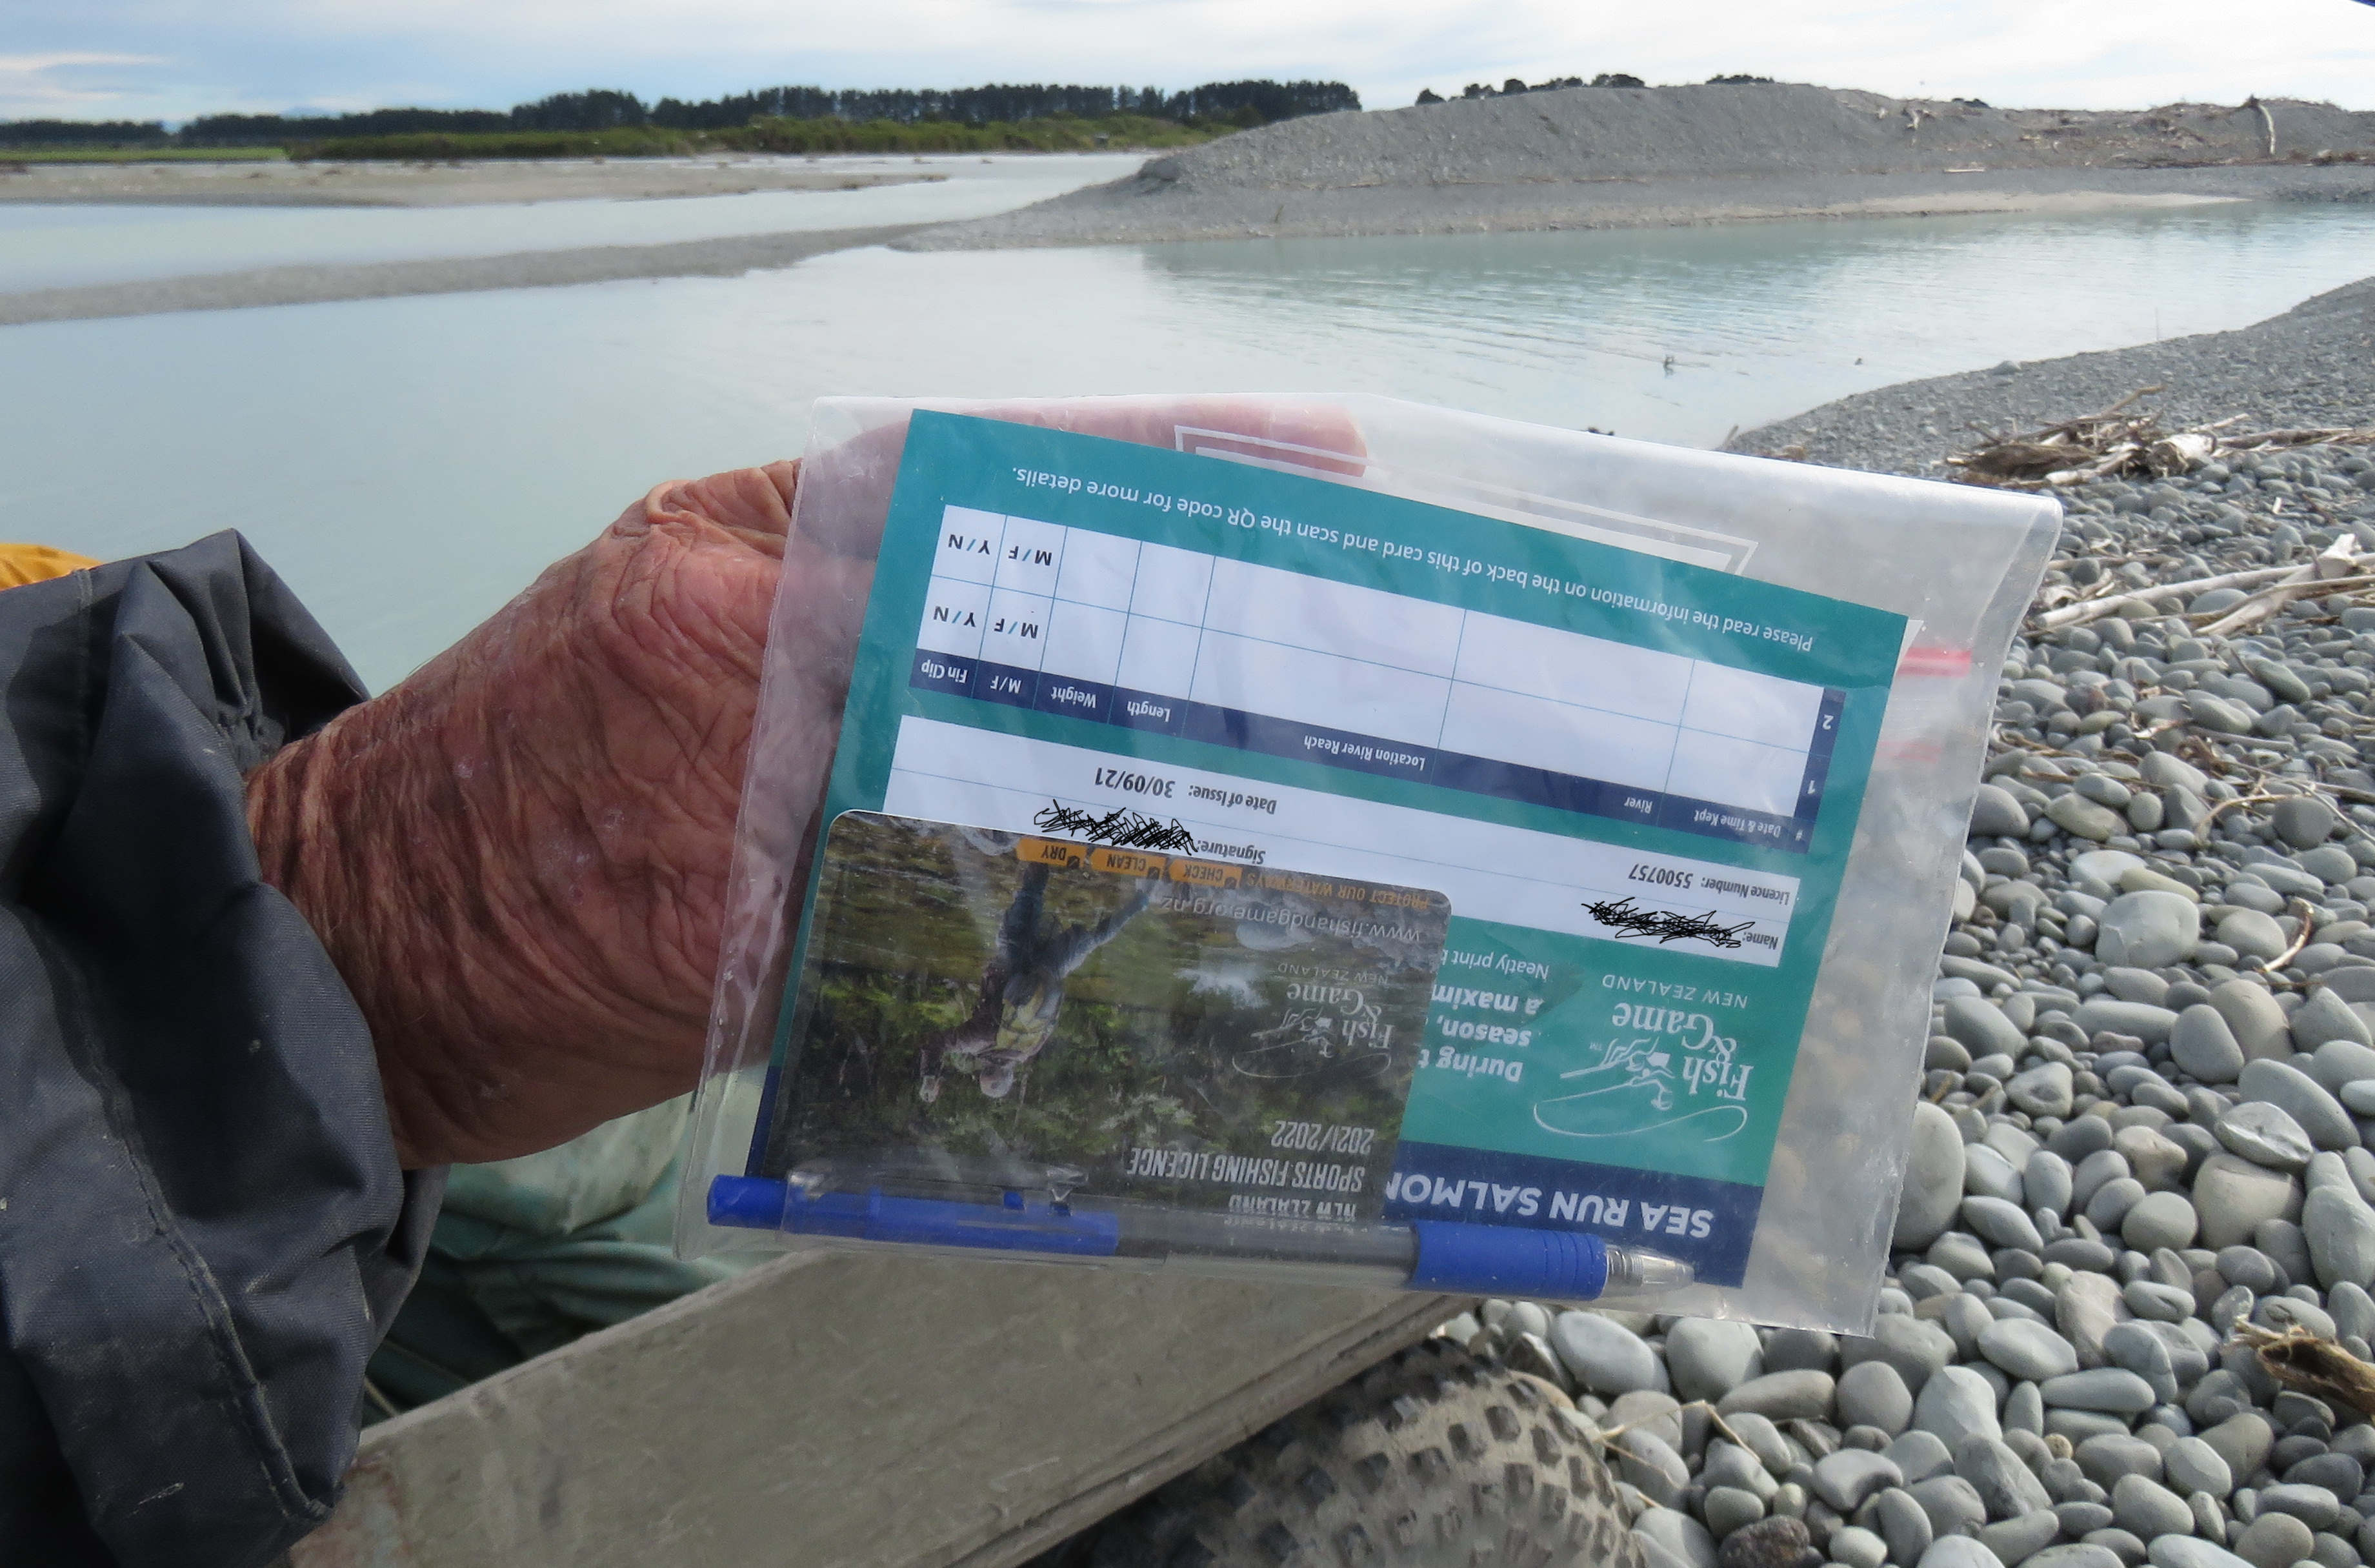 RLcsiJAN3 Carry your season bag limit card a pen and your sports fishing licence when fishing sea run salmon waters